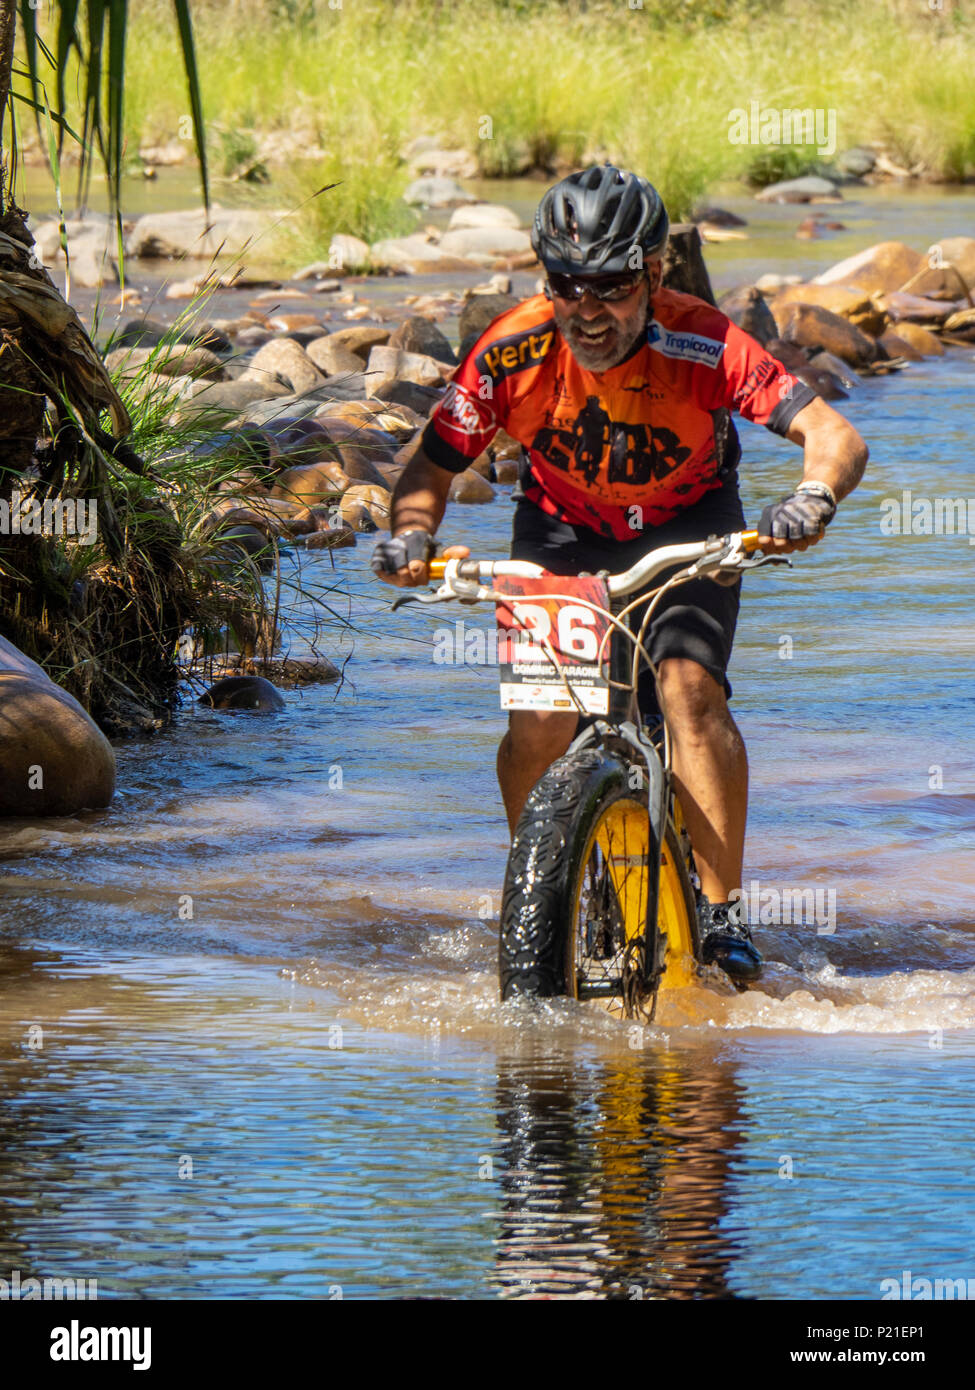 Gibb Challenge 2018 a cyclist on a fatbike crossing the Pentecost River at El Questro Station Kimberley Australia Stock Photo